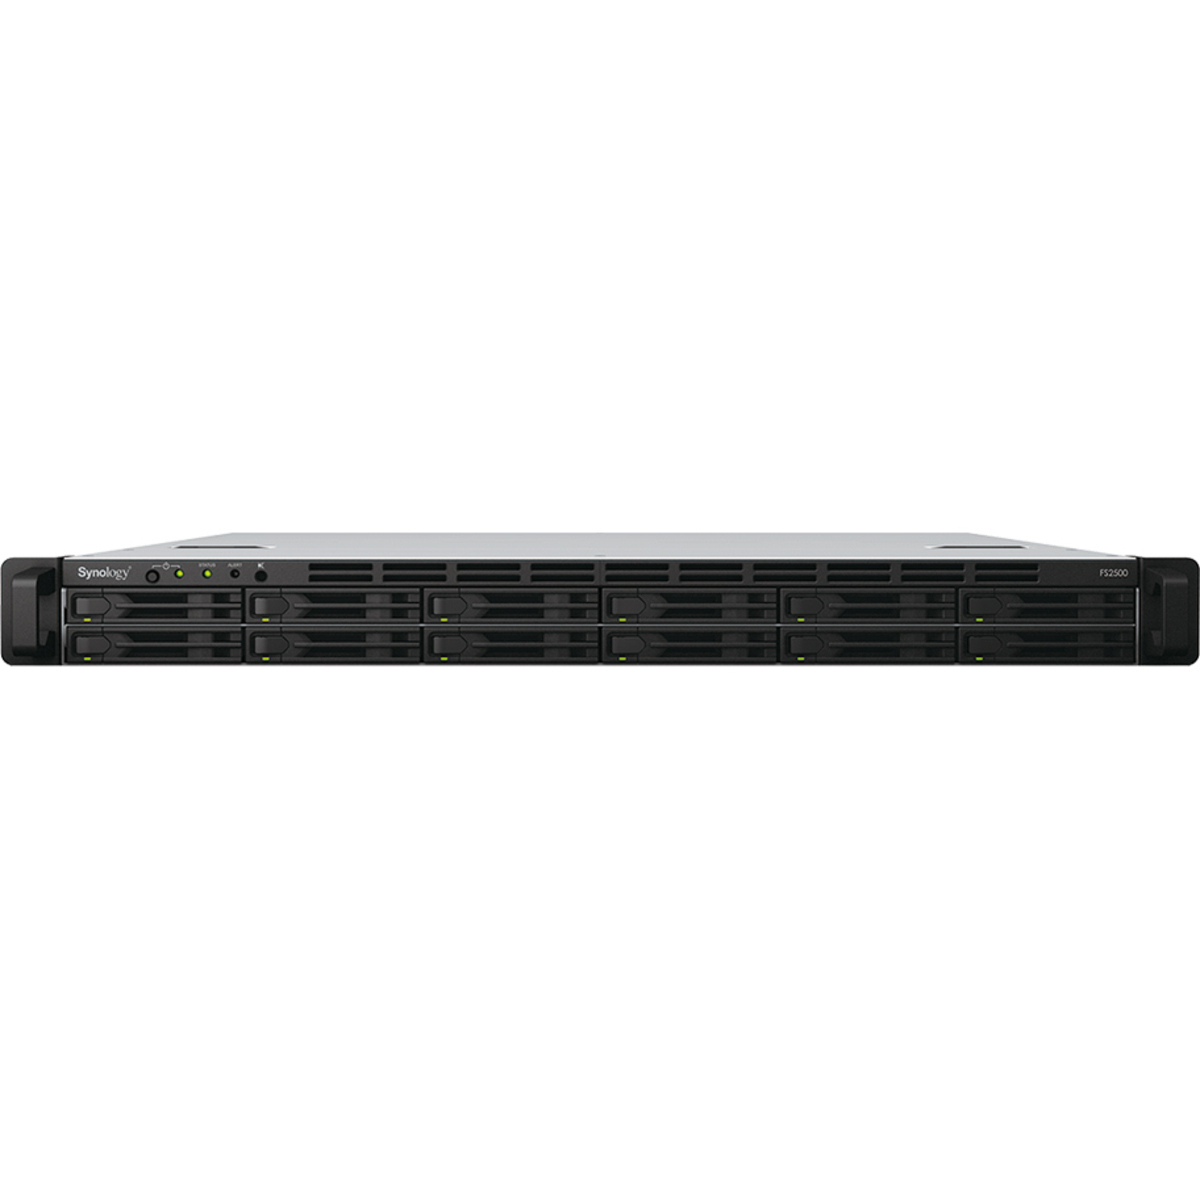 Synology FlashStation FS2500 11.5tb 12-Bay RackMount Large Business / Enterprise NAS - Network Attached Storage Device 12x960gb Synology SAT5210 Series SAT5210-960G 2.5 530/500MB/s SATA 6Gb/s SSD ENTERPRISE Class Drives Installed - Burn-In Tested - FREE RAM UPGRADE FlashStation FS2500